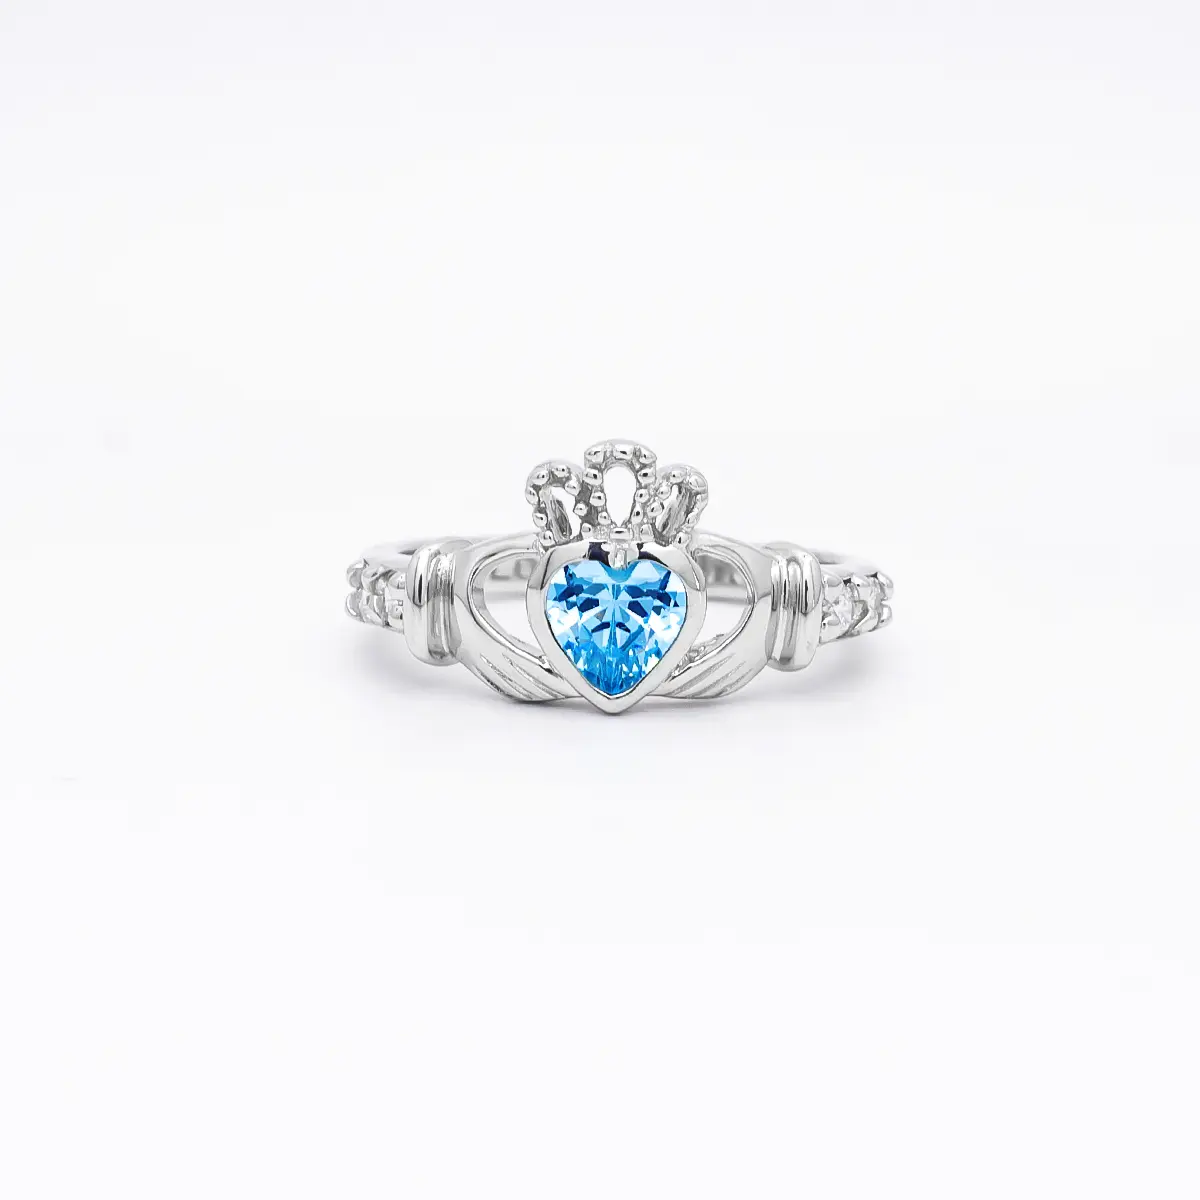 Product Review December Birthstone Claddagh Ring - Love, Loyalty, Friendship